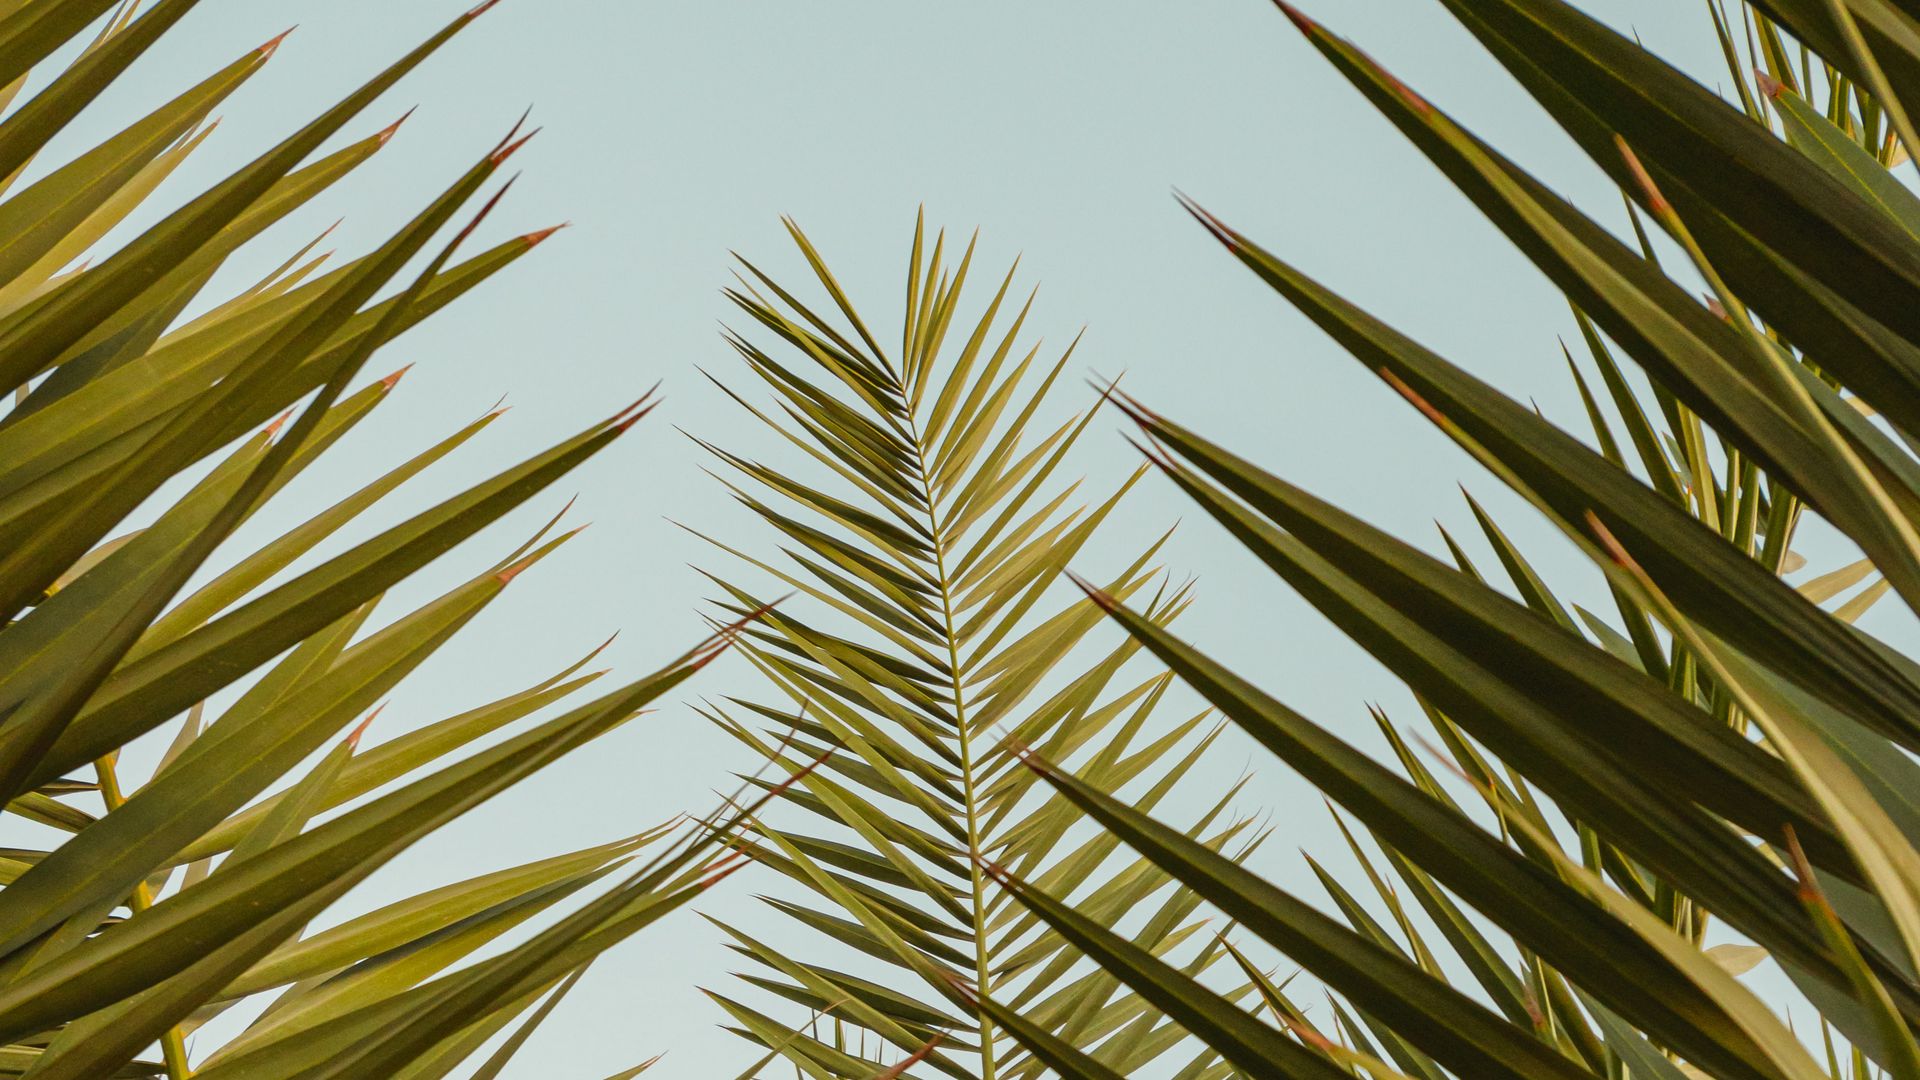 Download wallpaper 1920x1080 palm, leaves, branches, sky full hd, hdtv ...